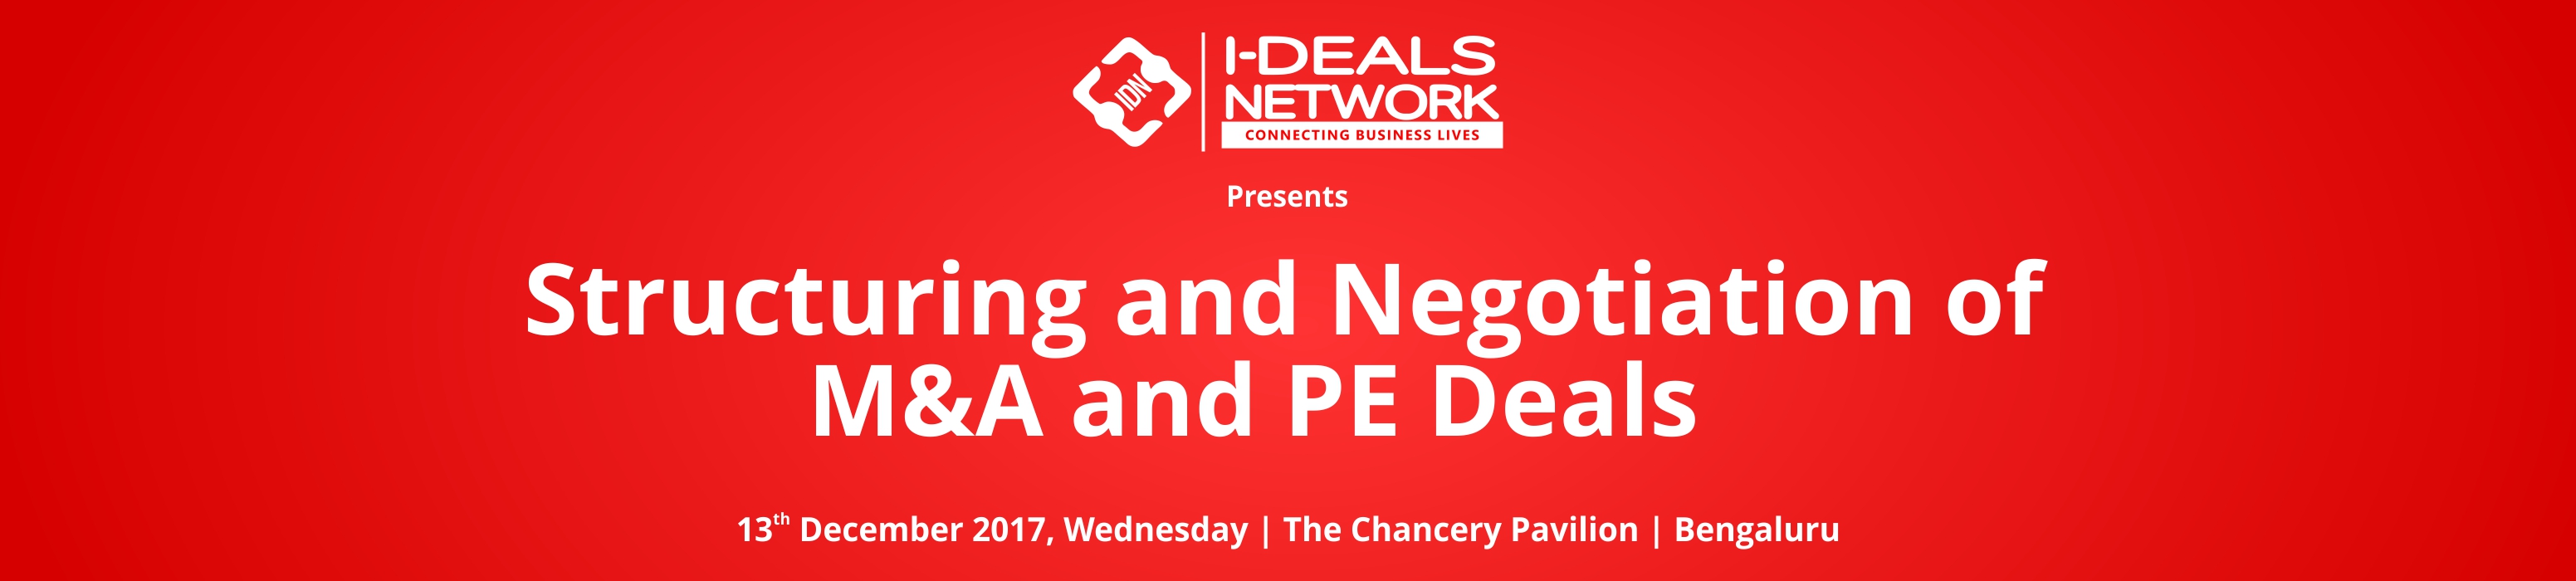 Structuring & Negotiation of M & A and PE Deals 13 Dec